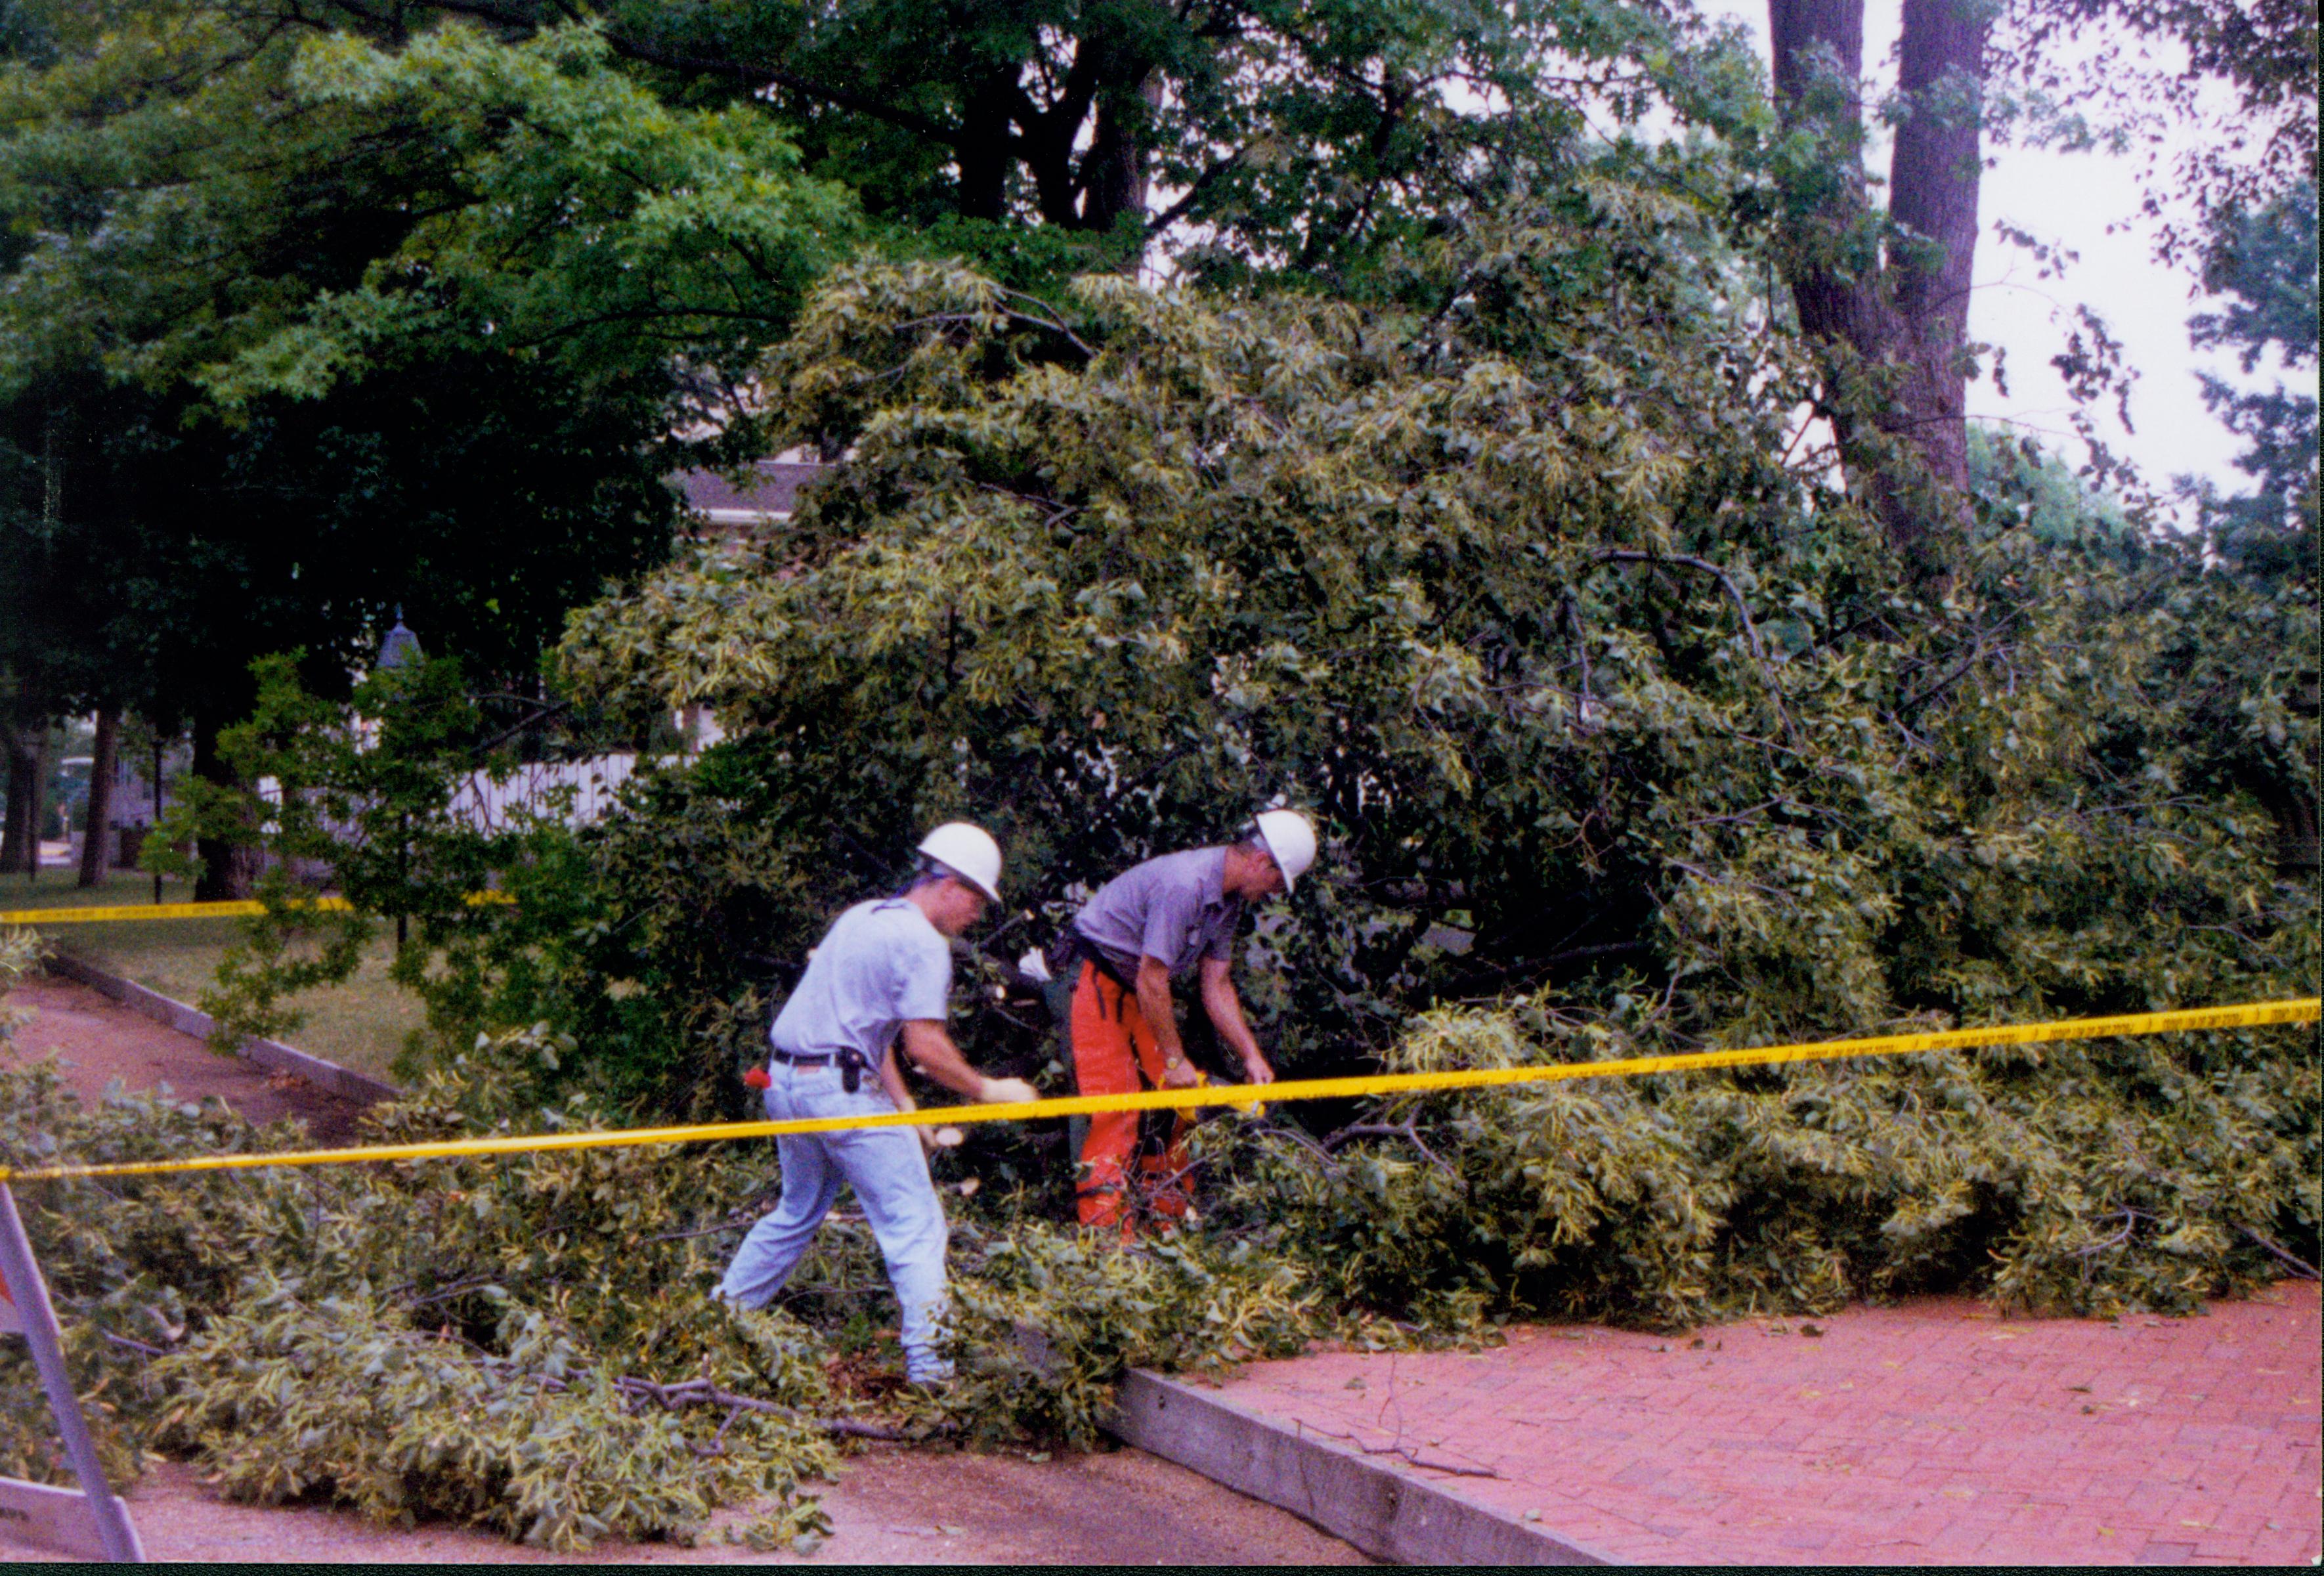 Two staff mambers remove a fallen tree near the Lincoln Home, on the brick plaza along Eighth Street. Photographer facing north east.